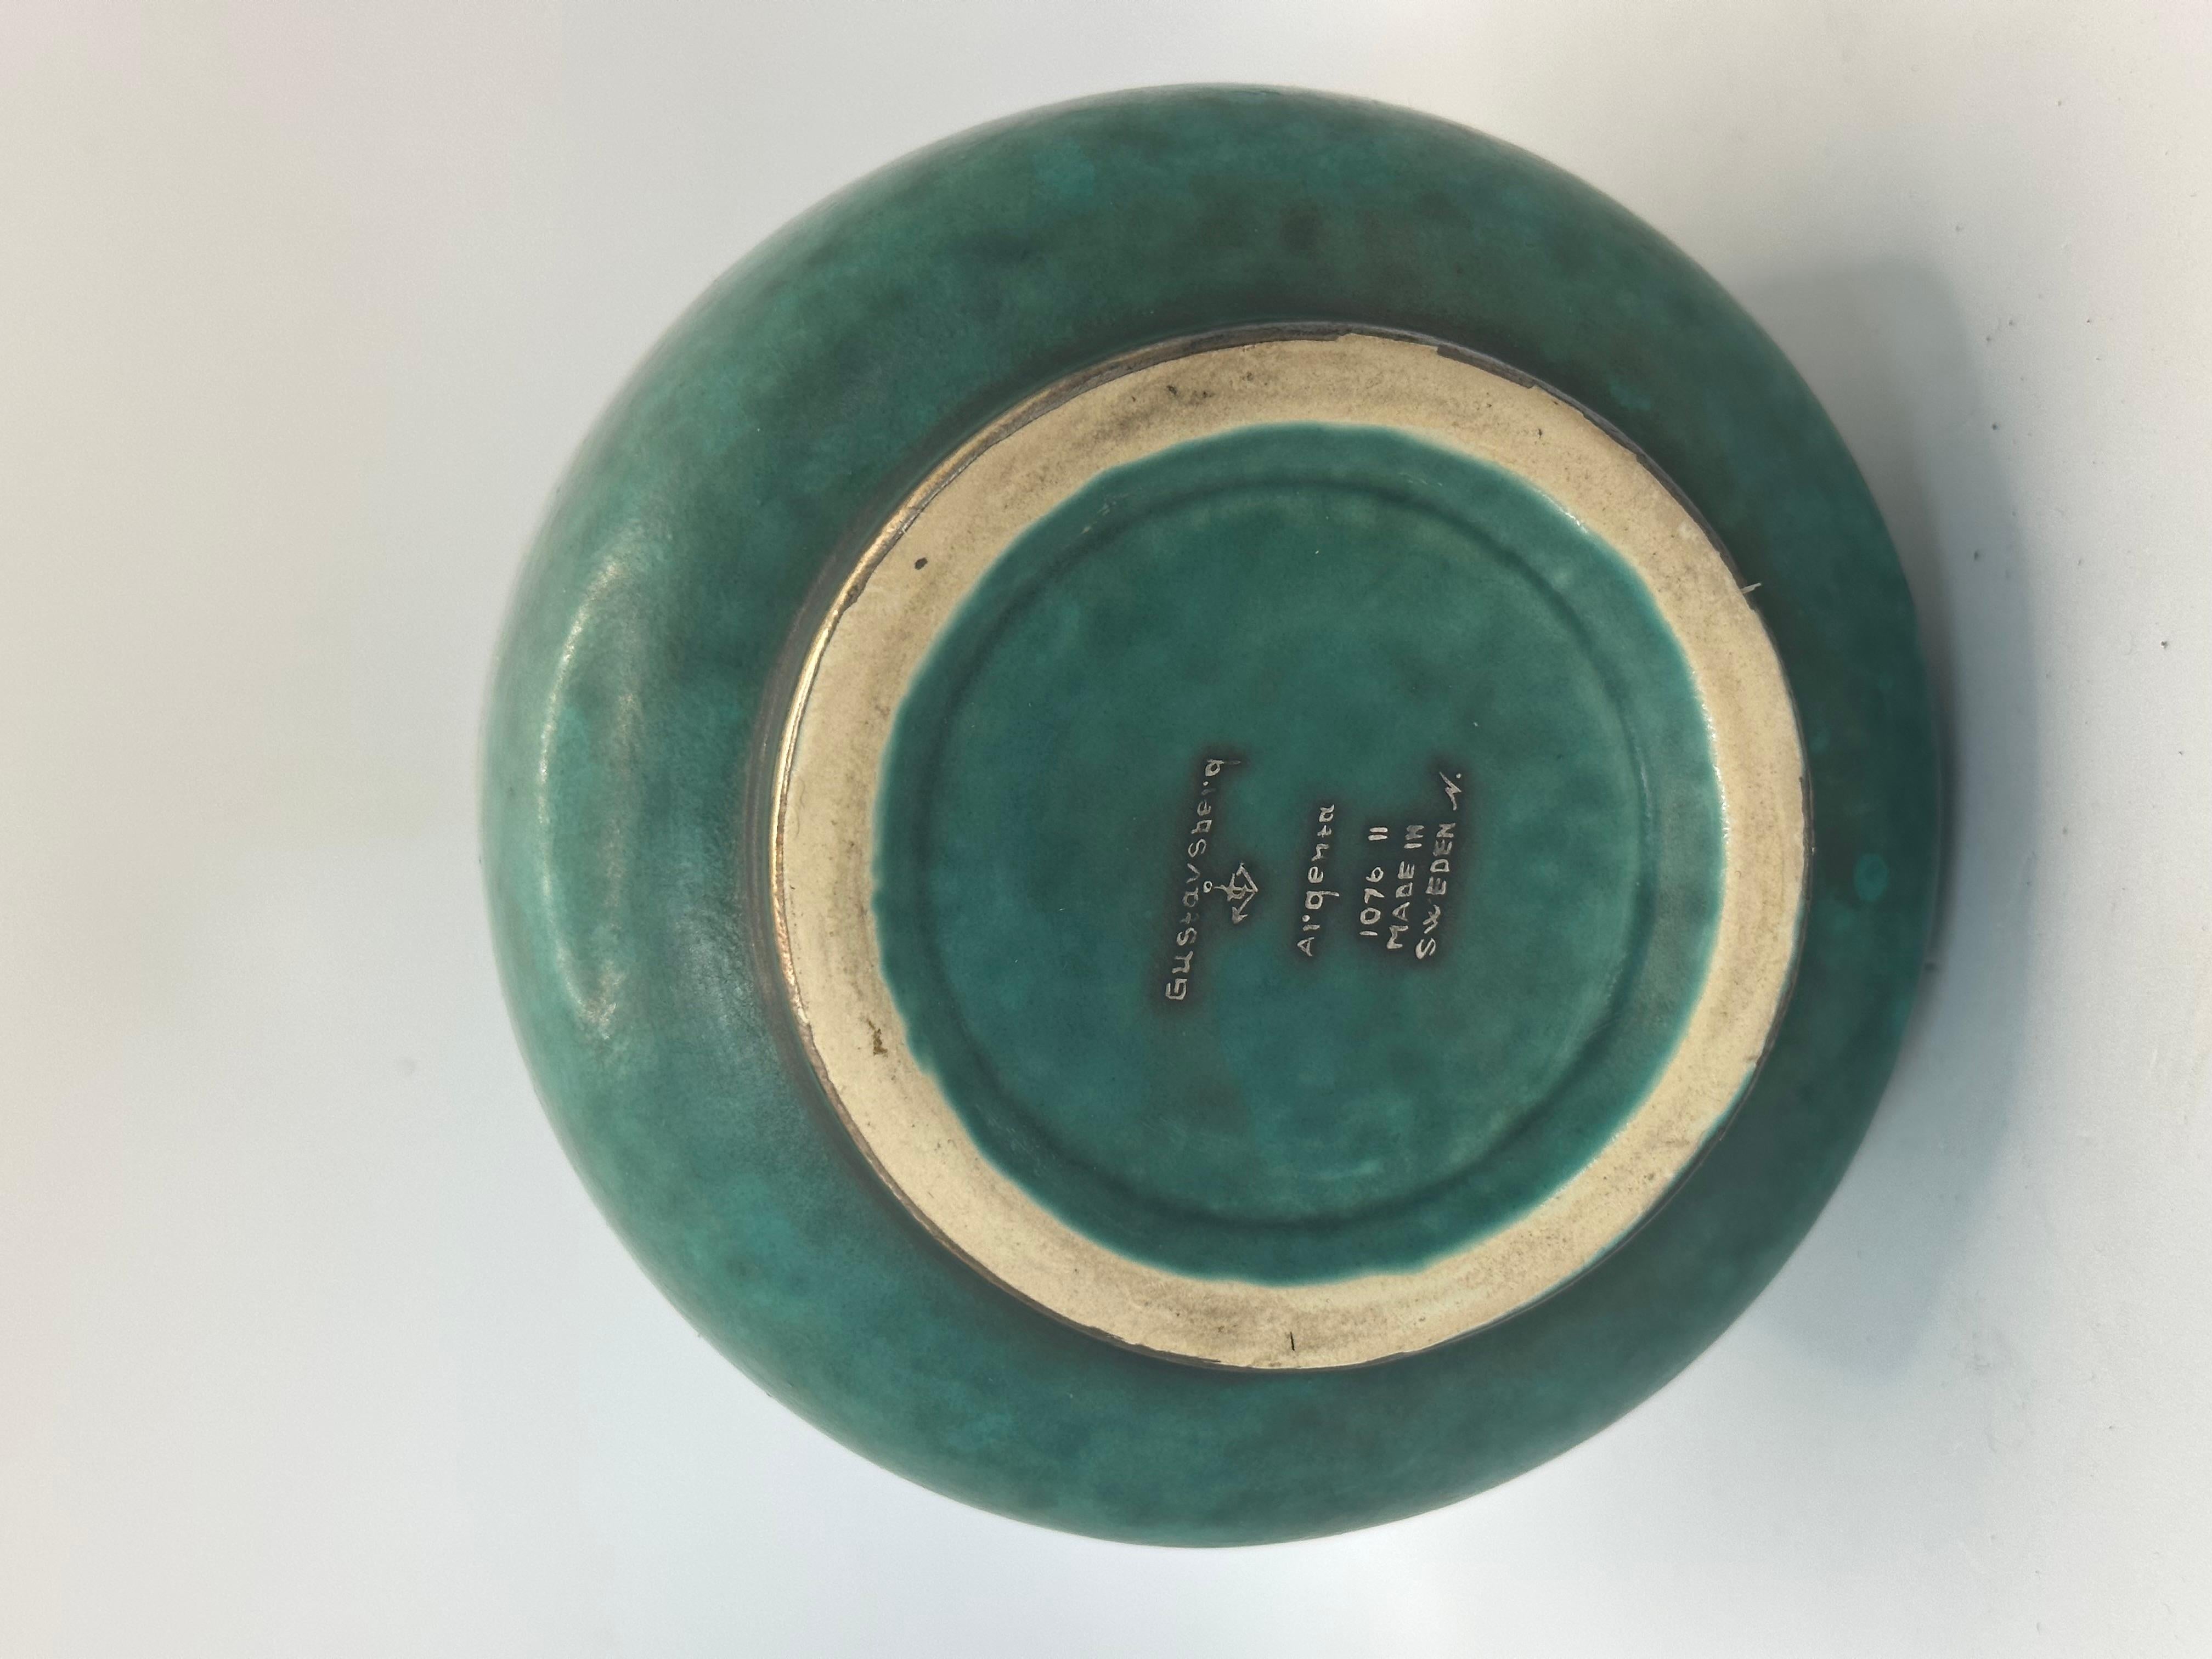 Wilhem Kage vase 'Argenta' for Gustavsberg Sweden 1950 Signed underneath 
Good condition
The Argenta sandstone collection, now emblematic with its green glaze and silver decorations, is one of Wilhelm Käge's most recognizable motifs. Designed in the